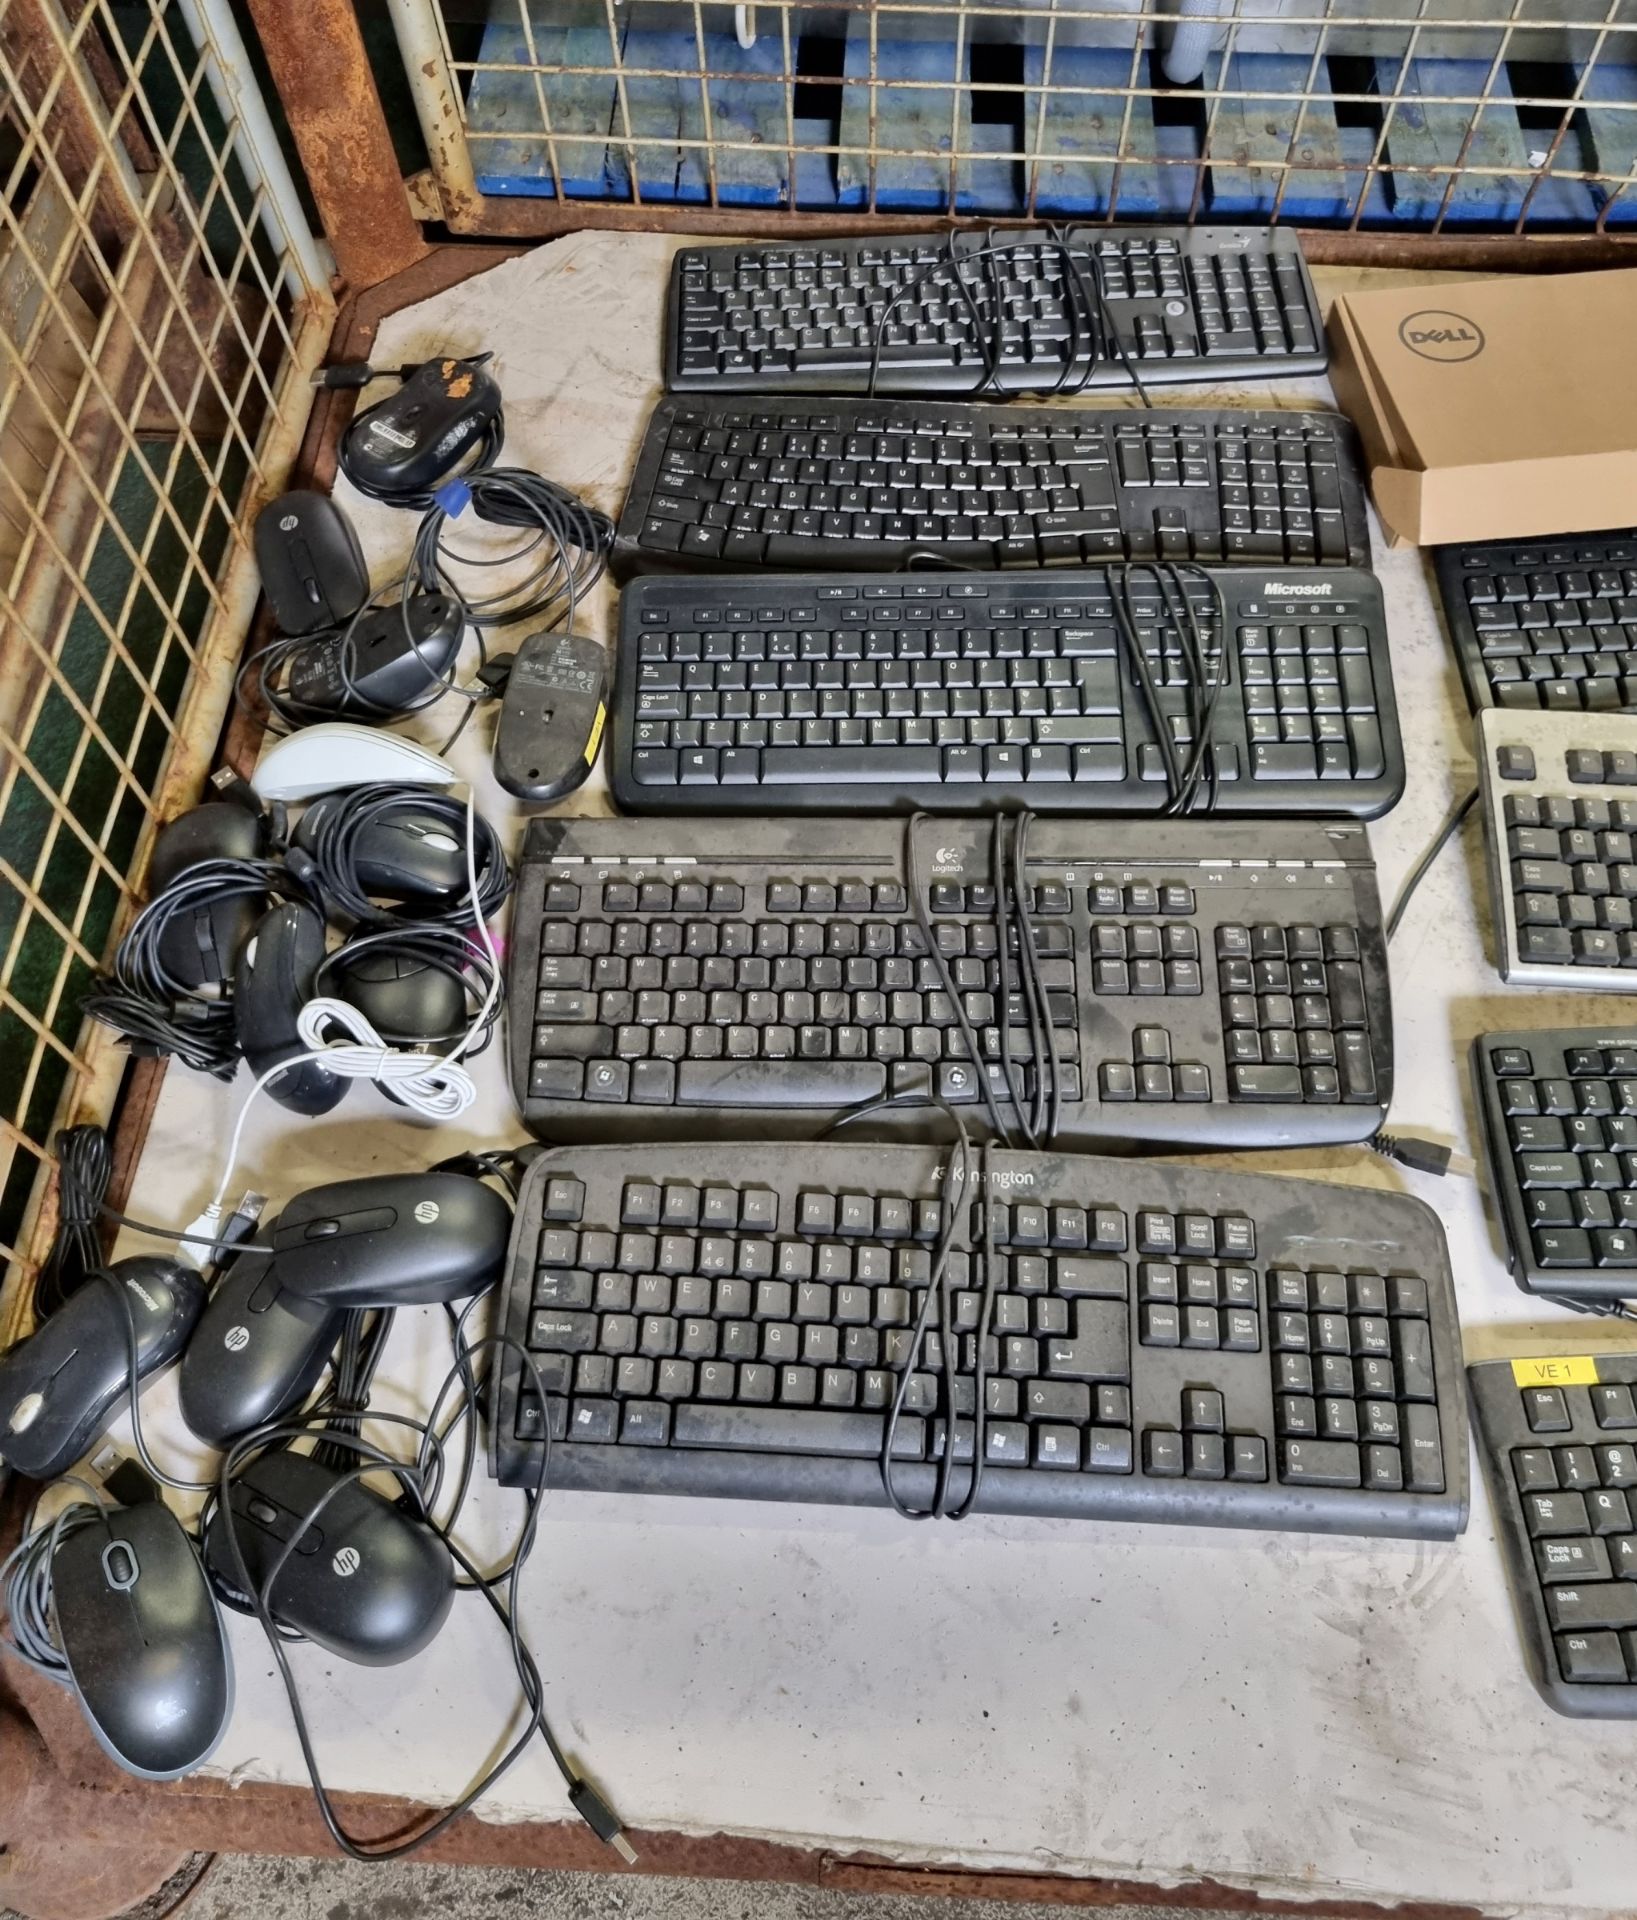 10x wired and wireless keyboards - 13x wired mice - Image 4 of 5